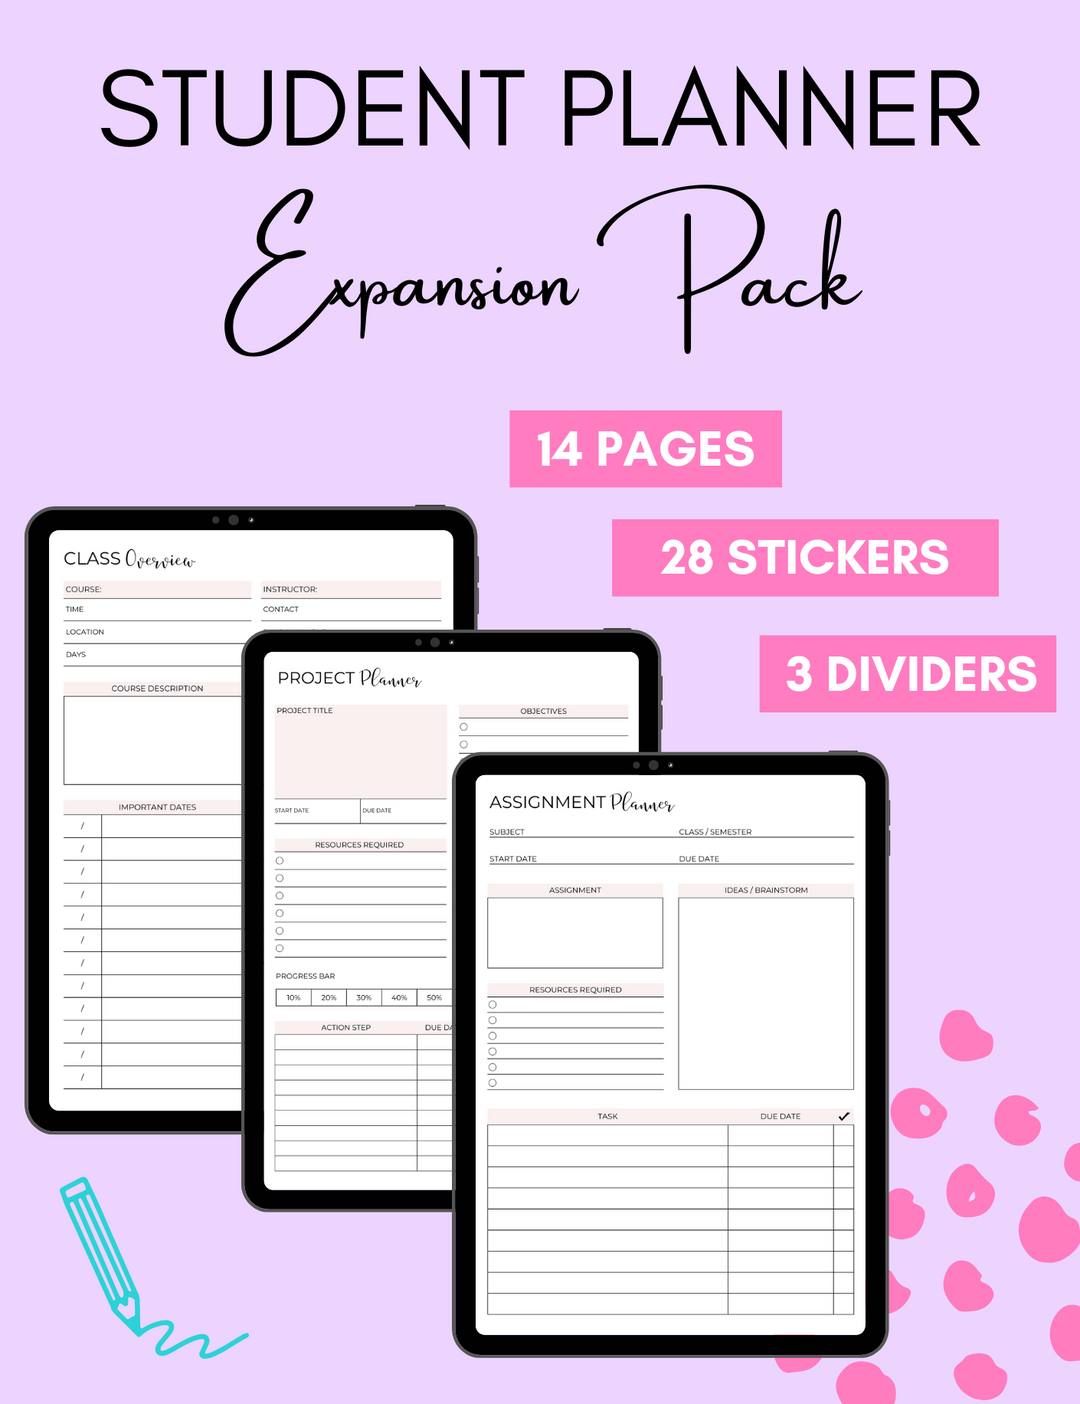 Student Planner Expansion Pack